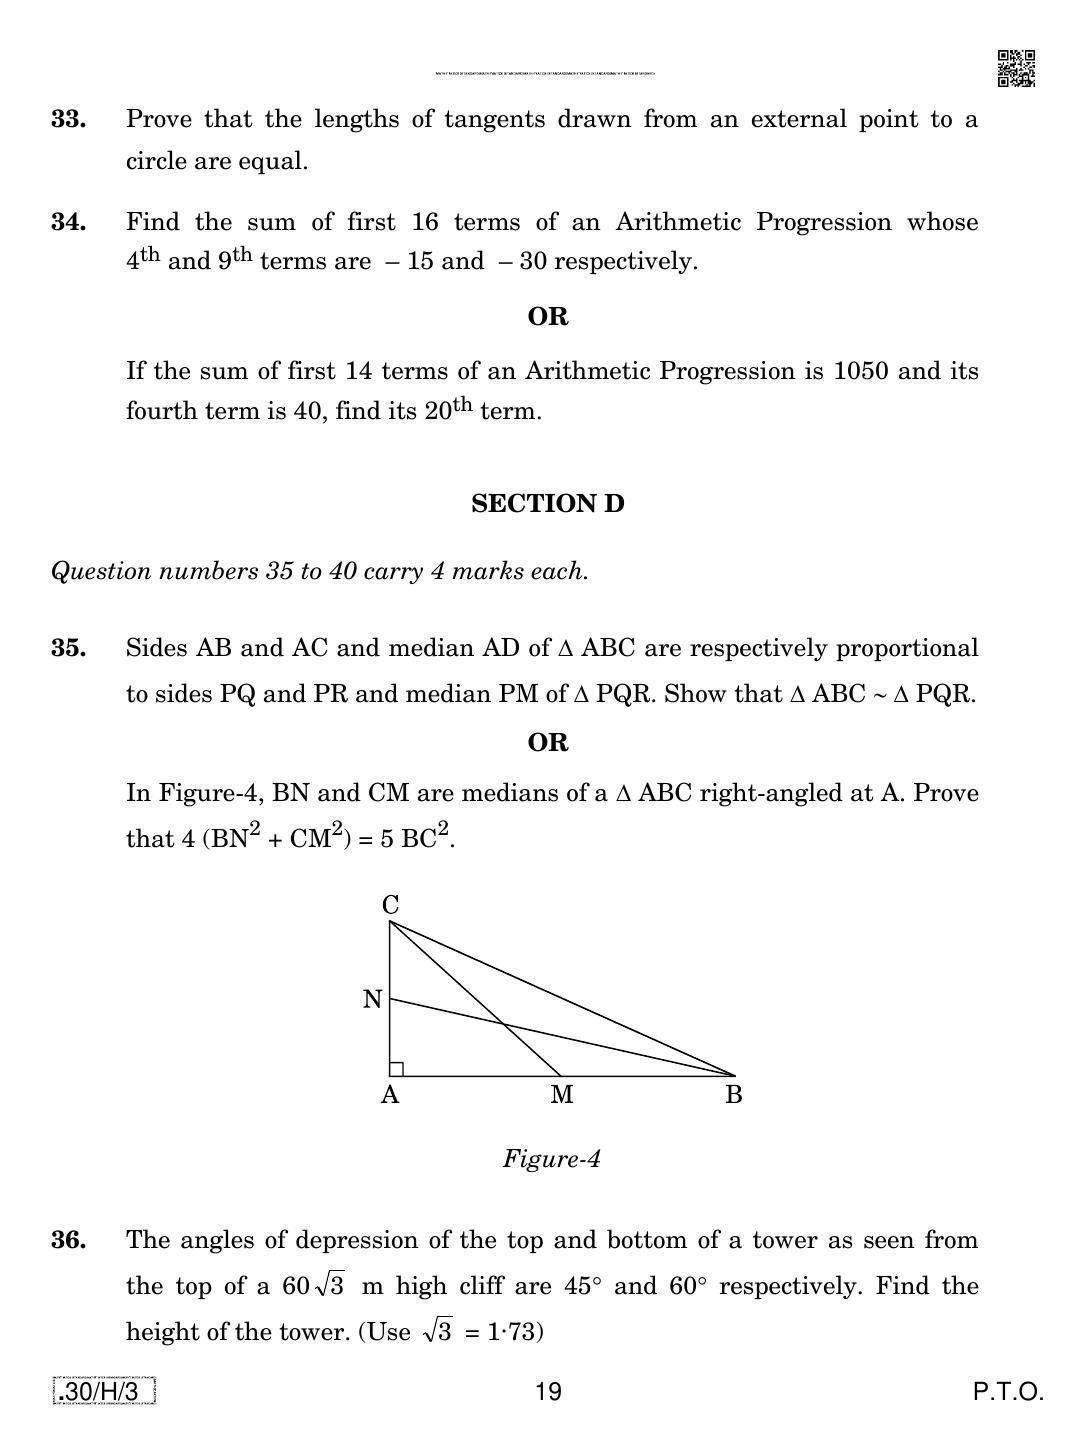 CBSE Class 10 30-C-3 - Maths (Standard) 2020 Compartment Question Paper - Page 19